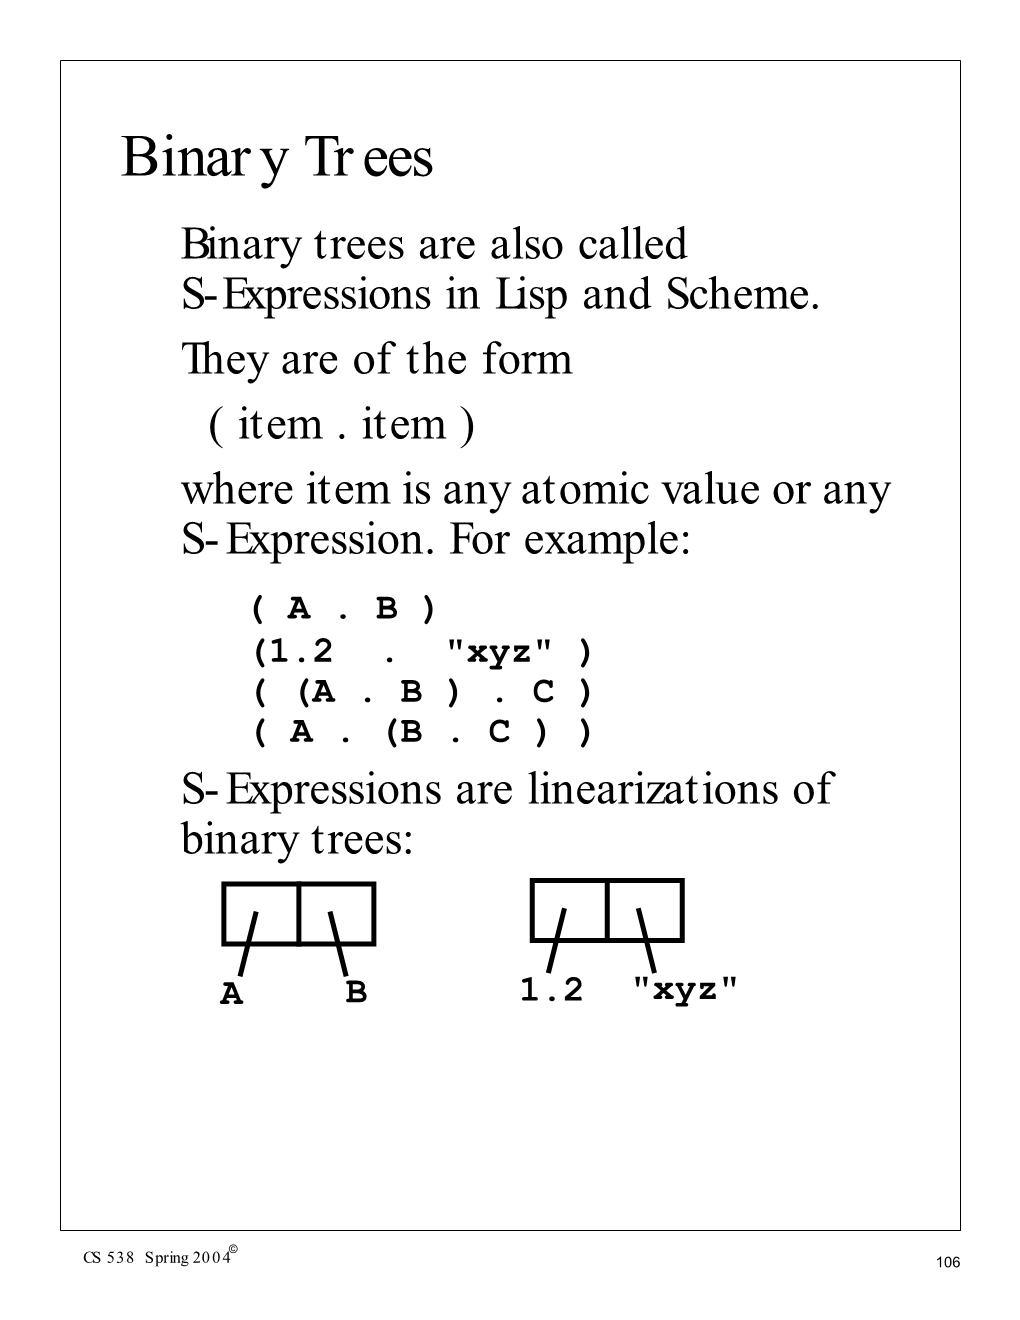 Binary Trees Binary Trees Are Also Called S-Expressions in Lisp and Scheme